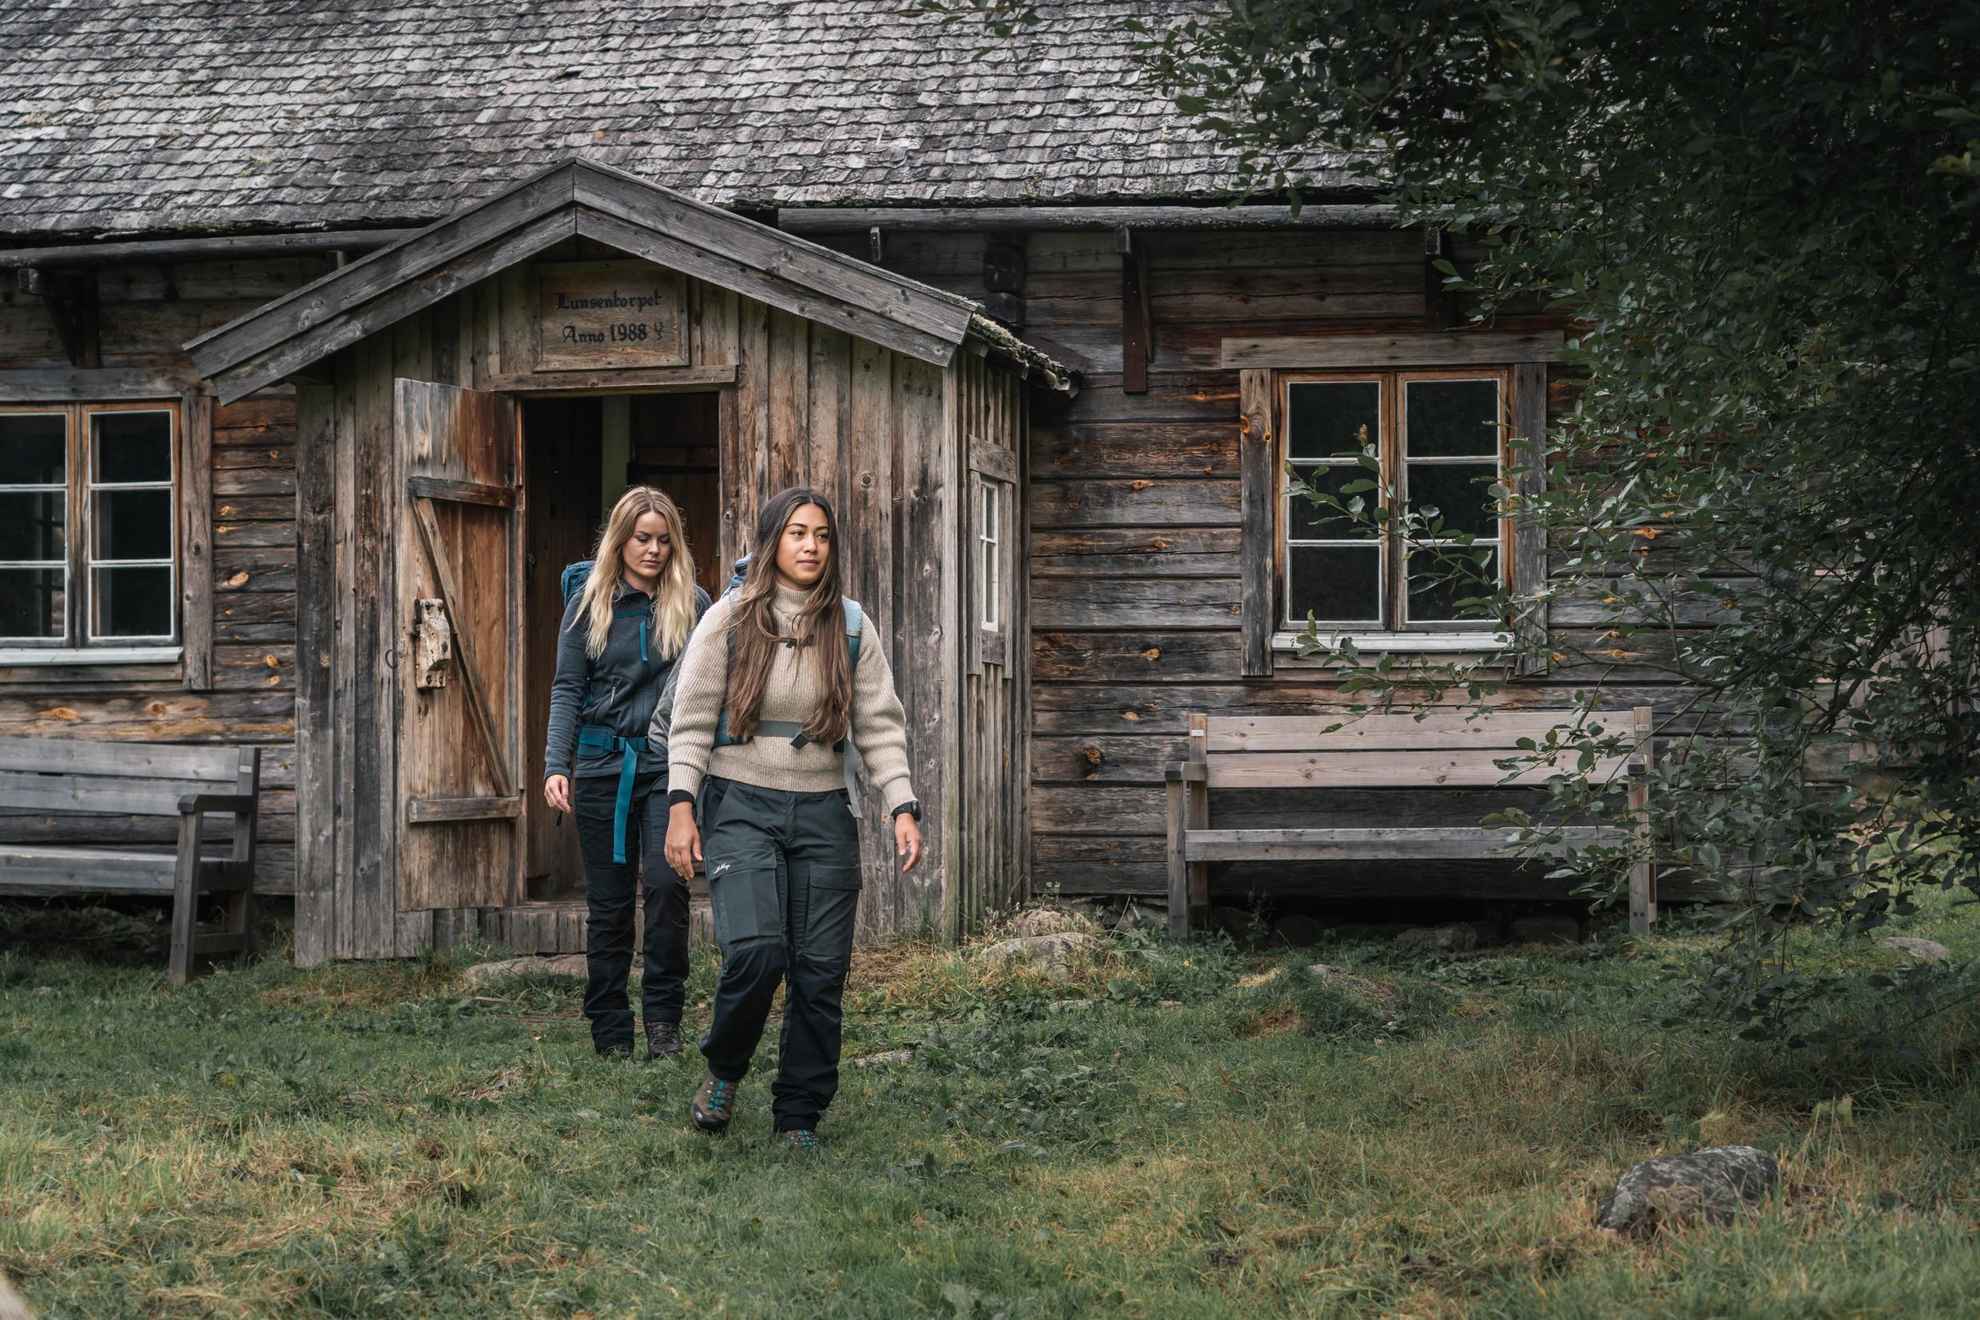 Two hiking women are leaving a wooden cottage in the forest.